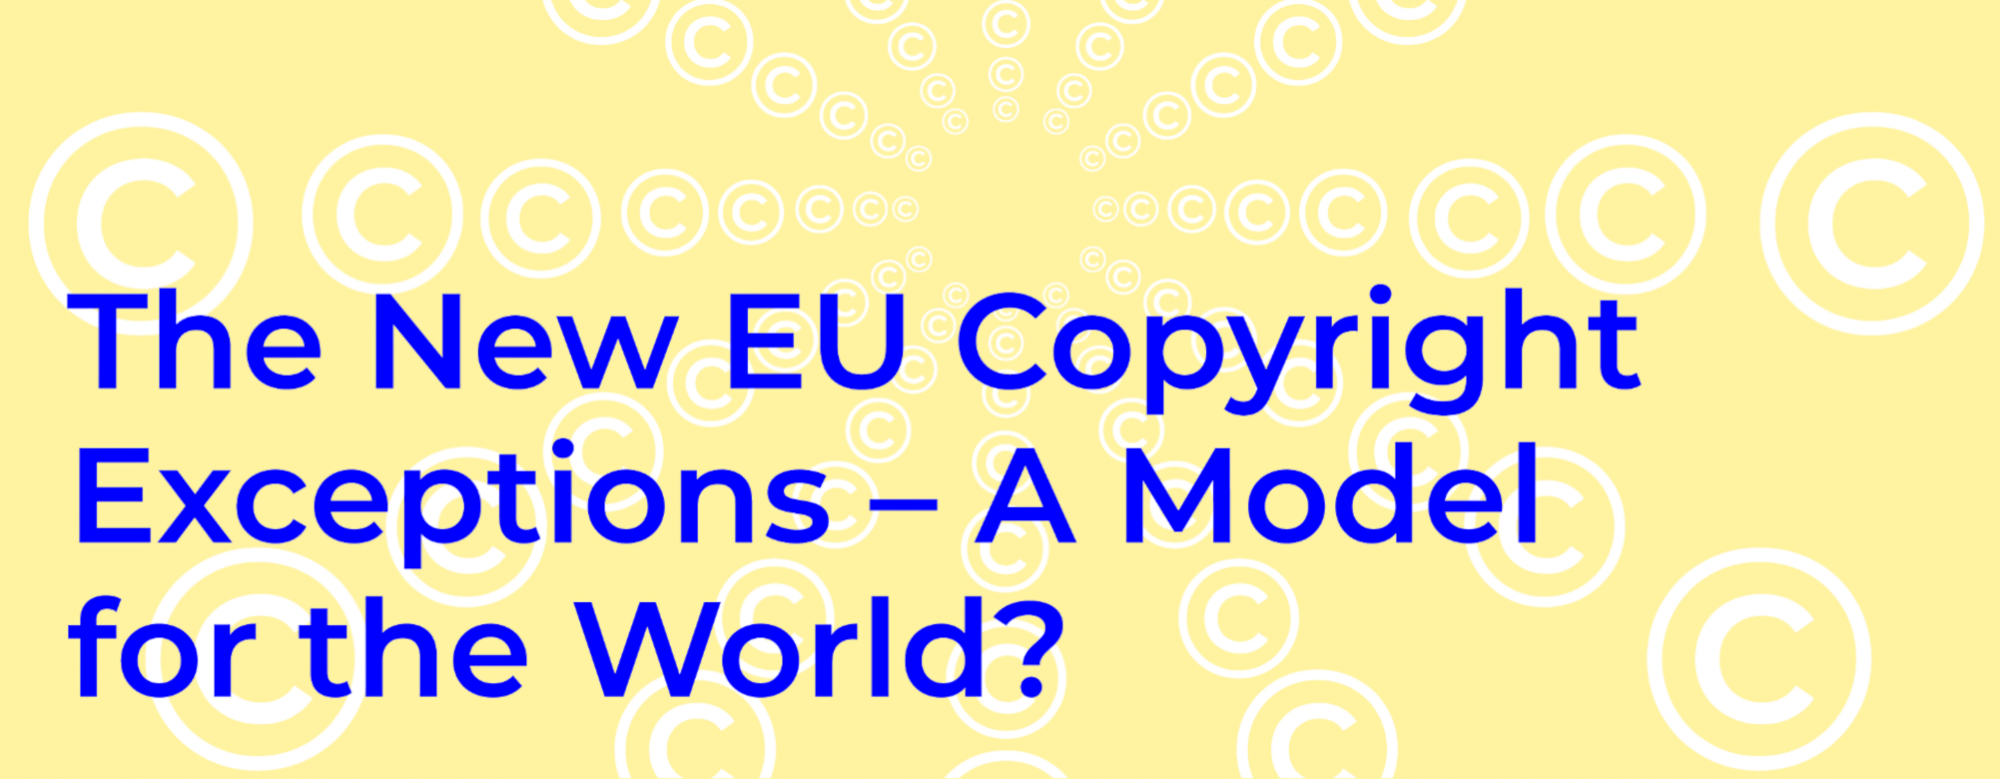 Banner The New EU Copyright Exceptions - A Model For the World?